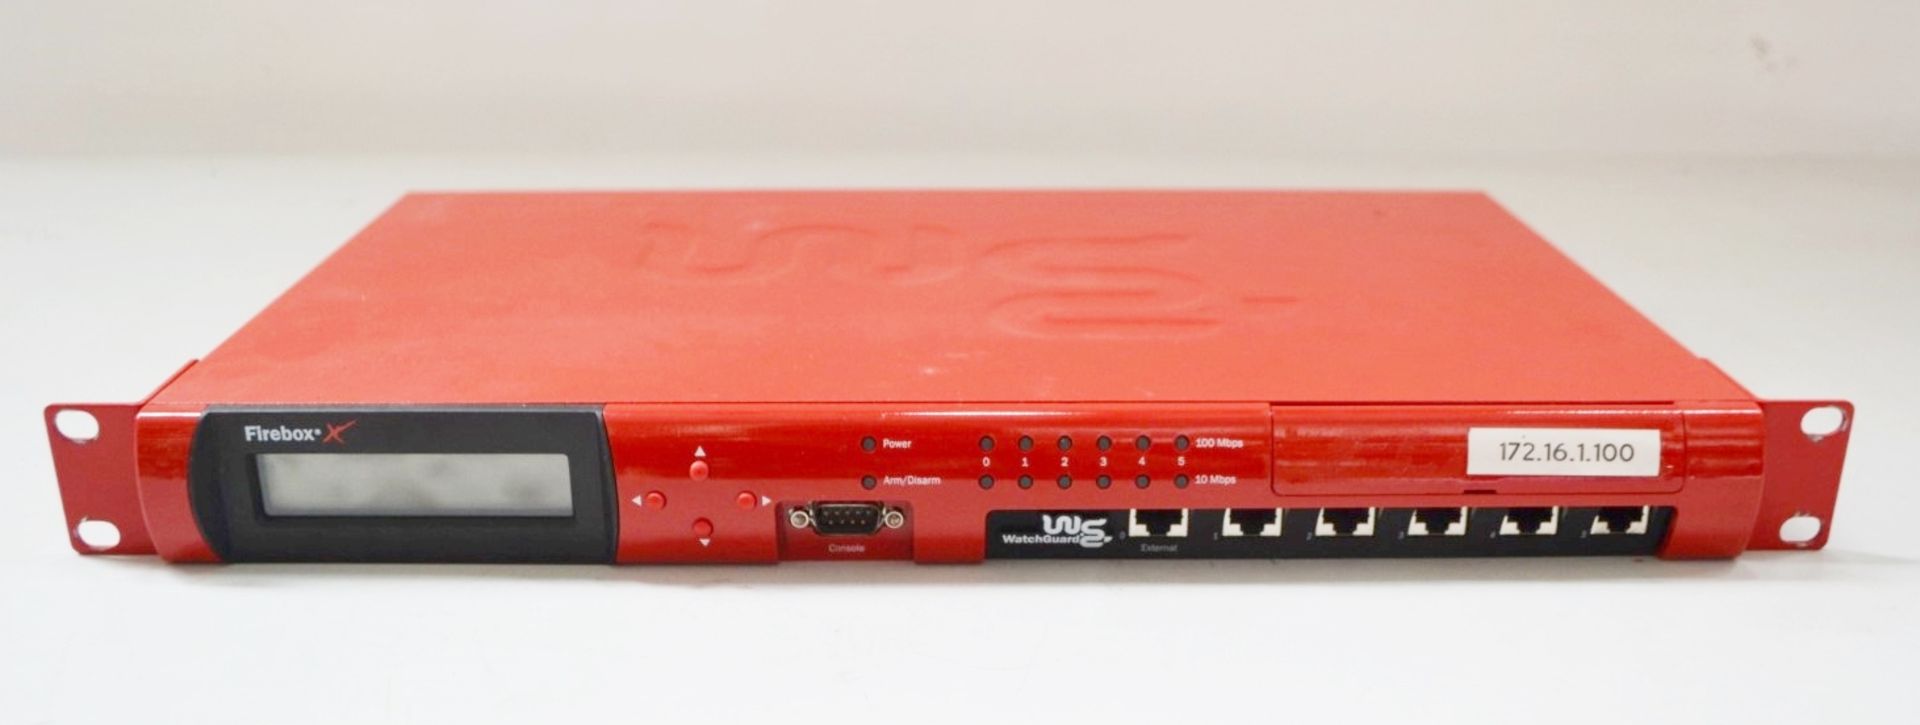 3 x Red Watchguard Firebox Security System's - Ref: LD359 - CL409 - Altrincham WA14 - Image 10 of 13